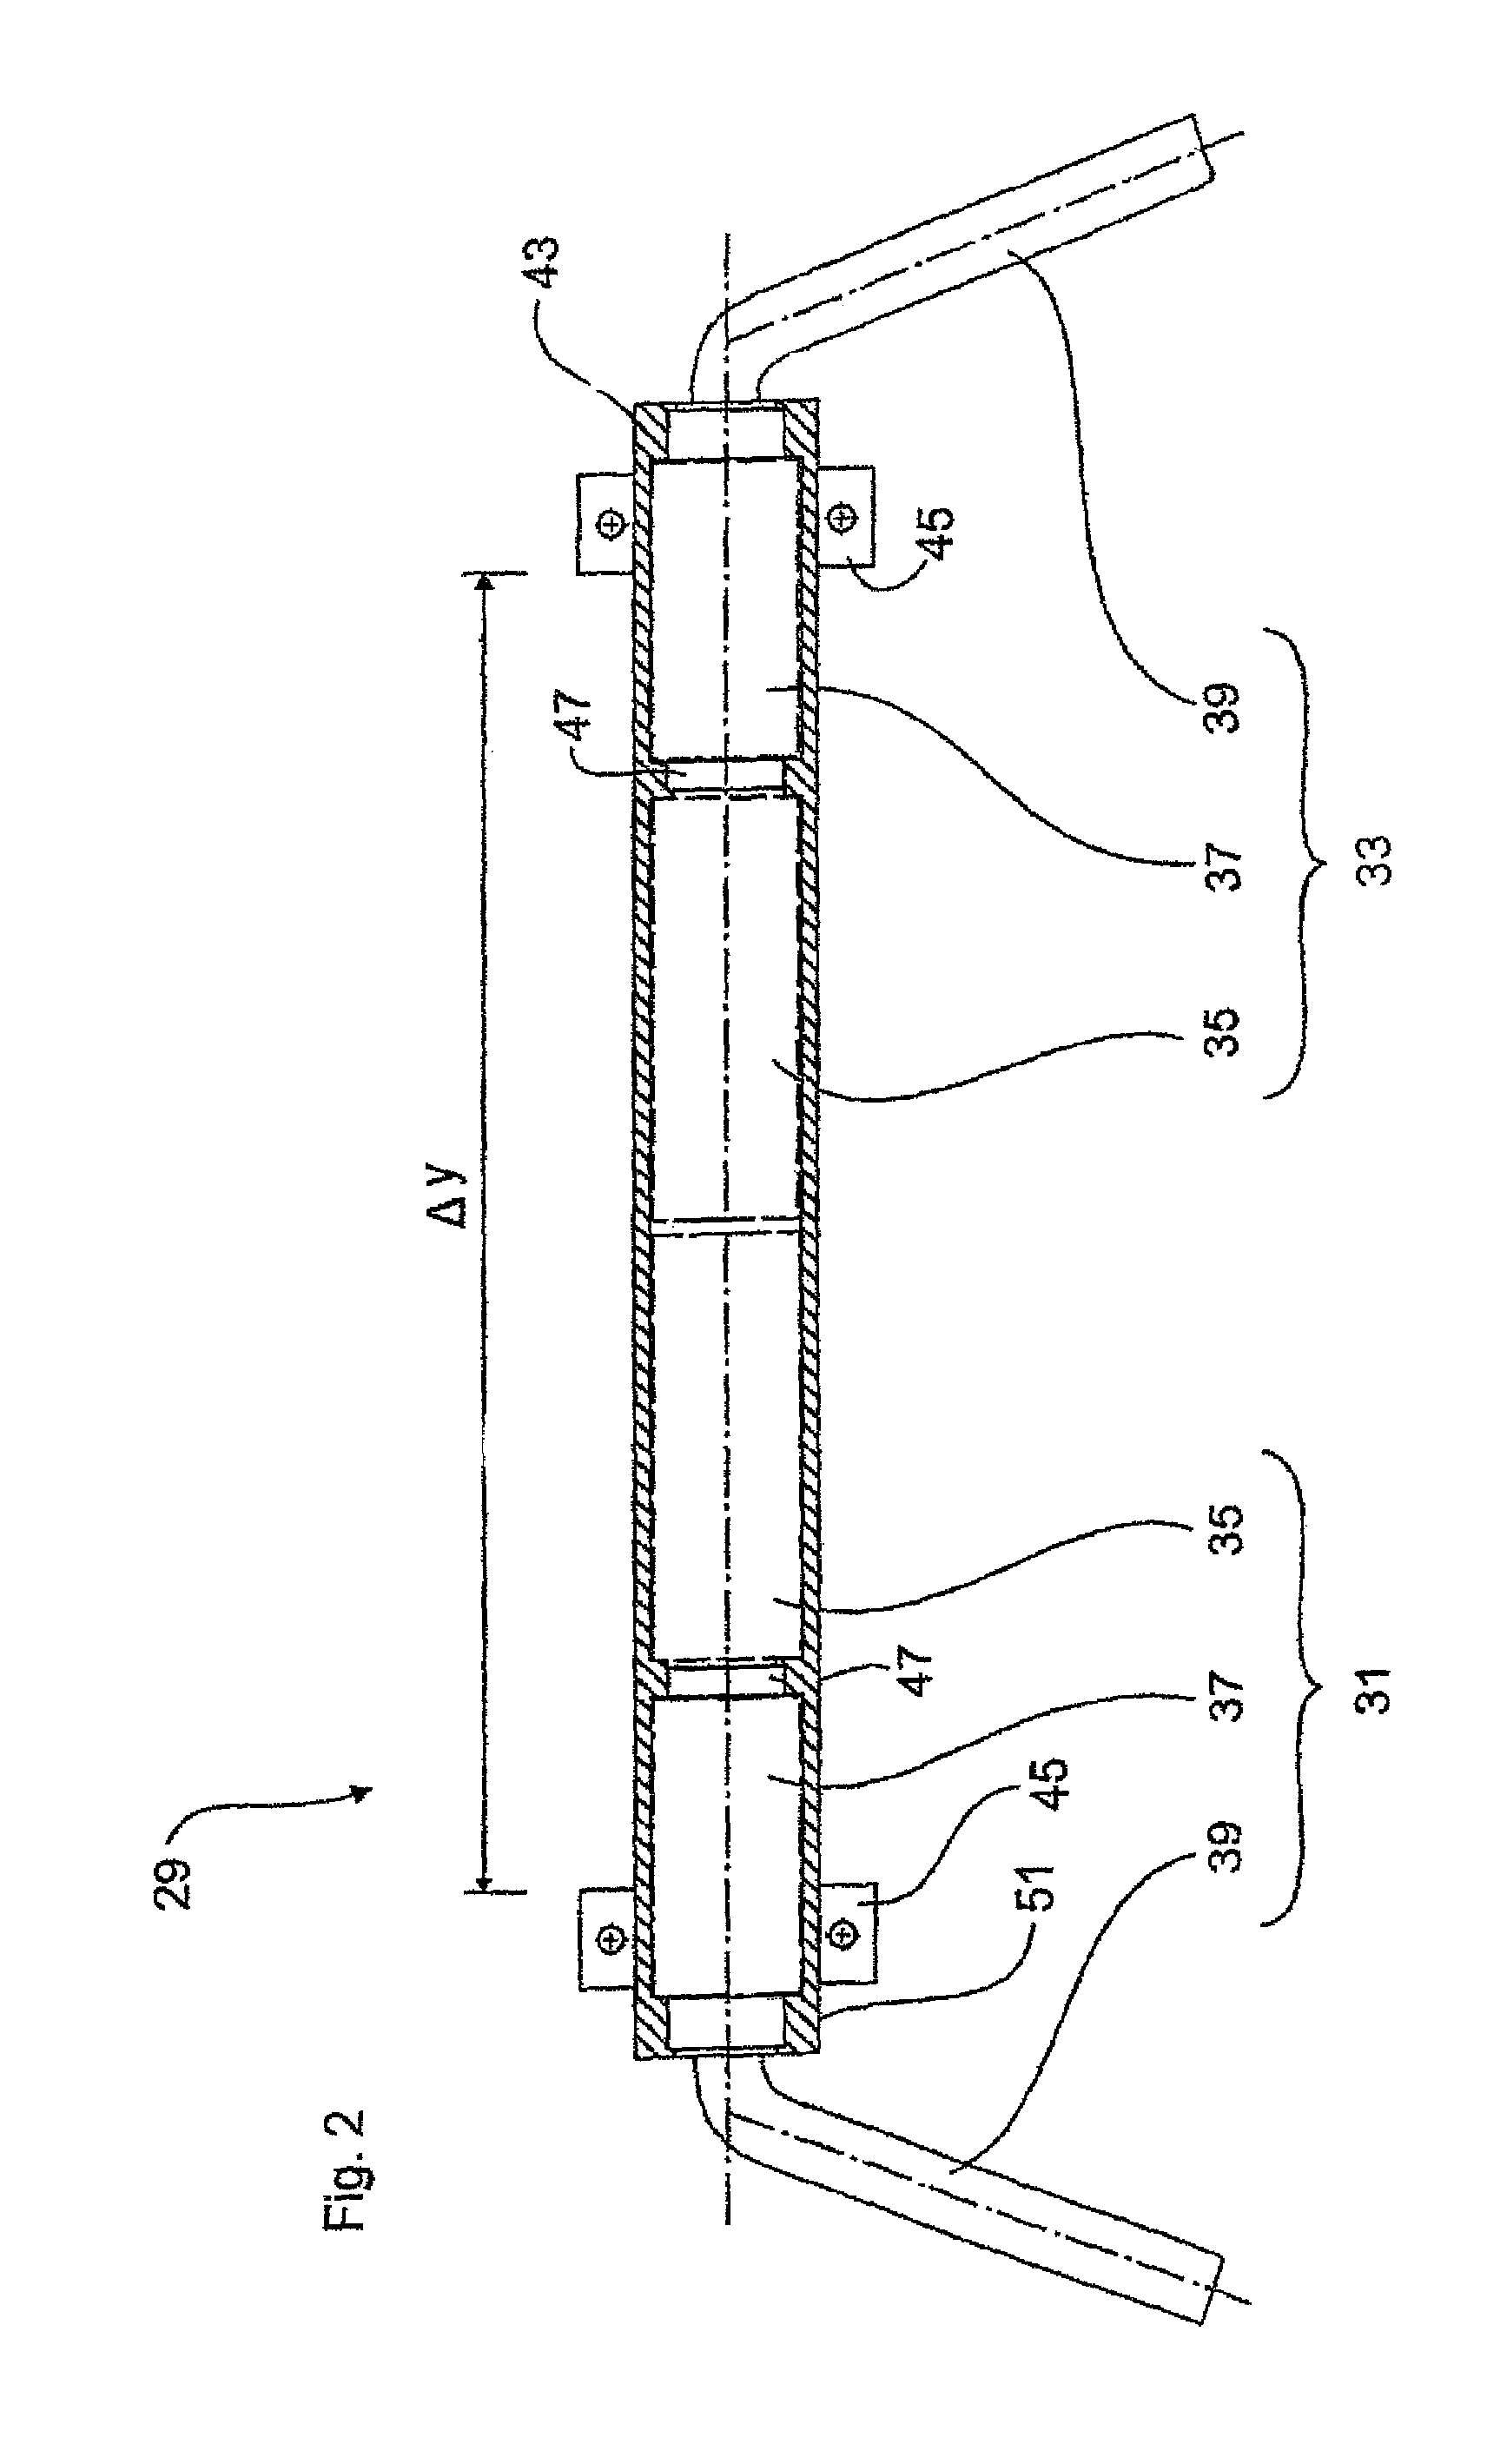 Torsion bar system for a vehicle axle of a two track vehicle